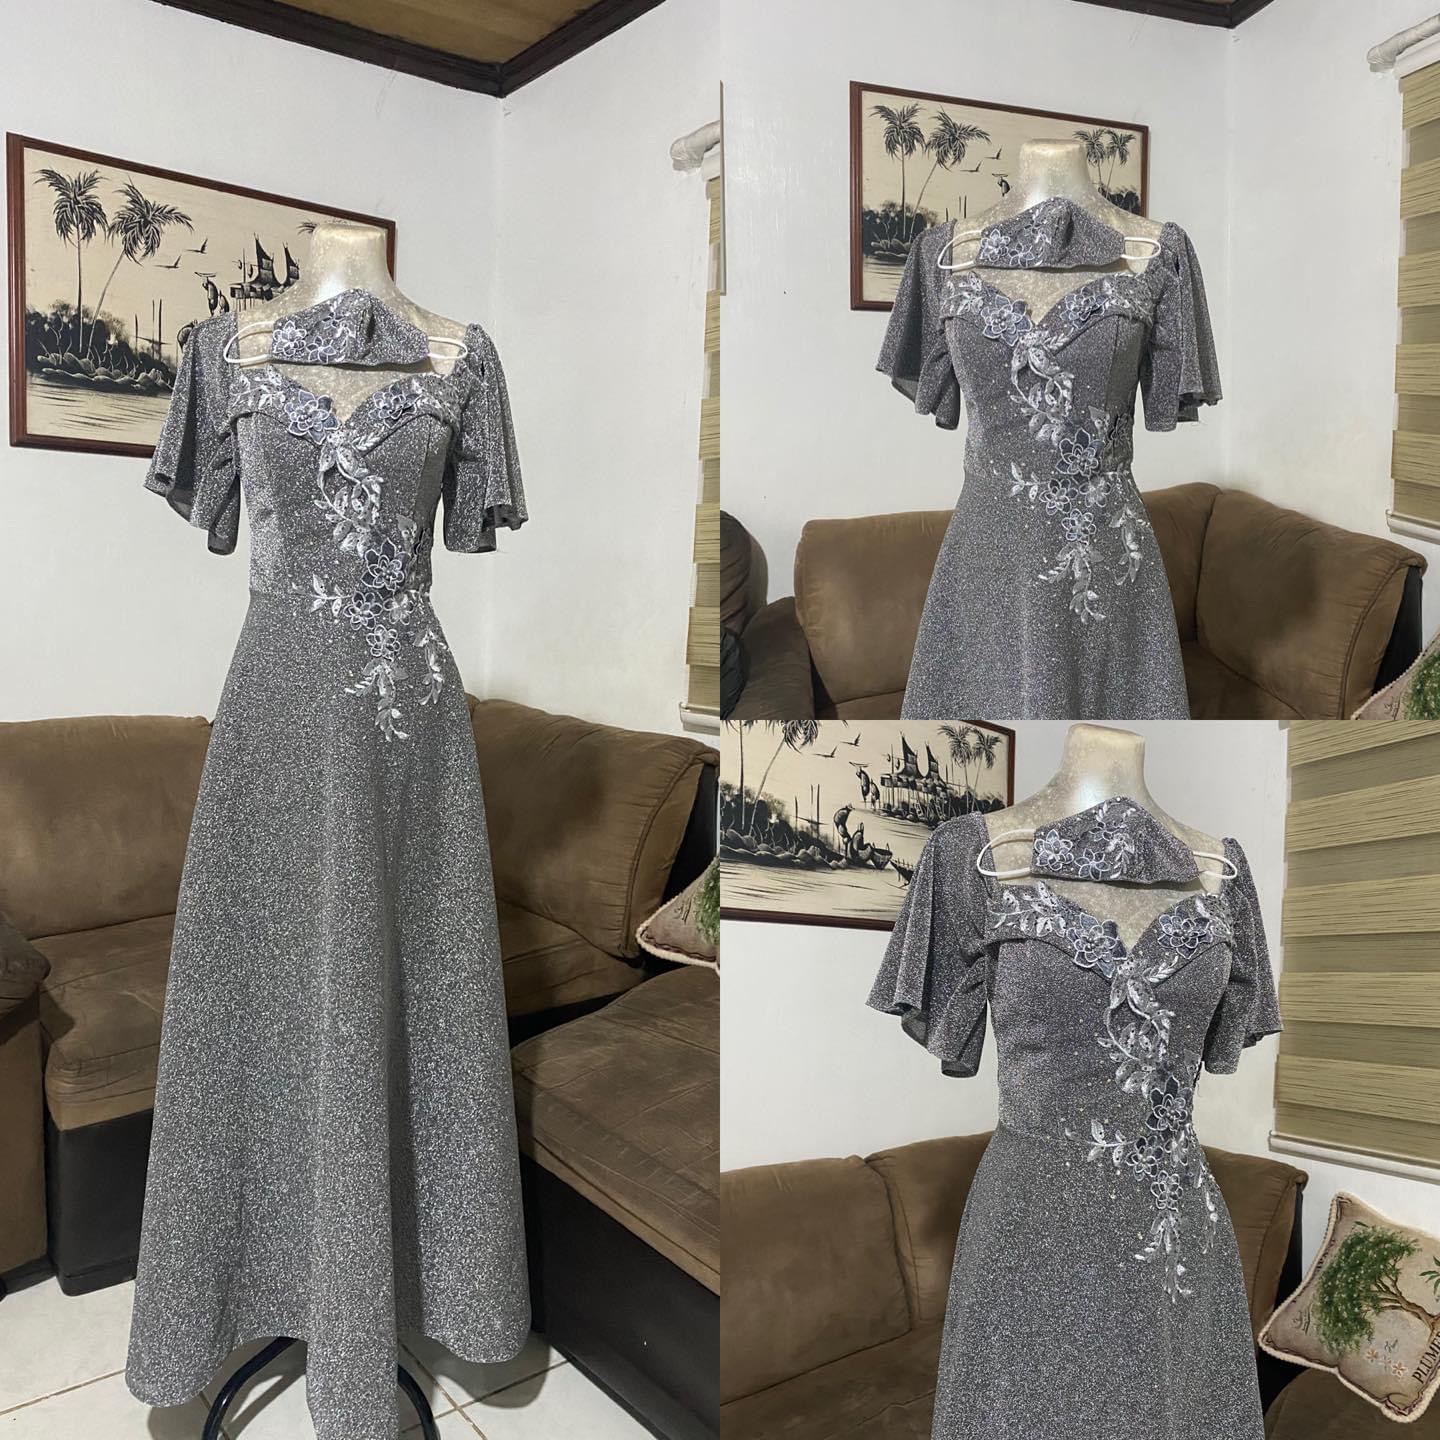 presenting you a very perfect evening date or a party outfit to look  elegant n classy this wedding season full flair handwork neck gown  collection